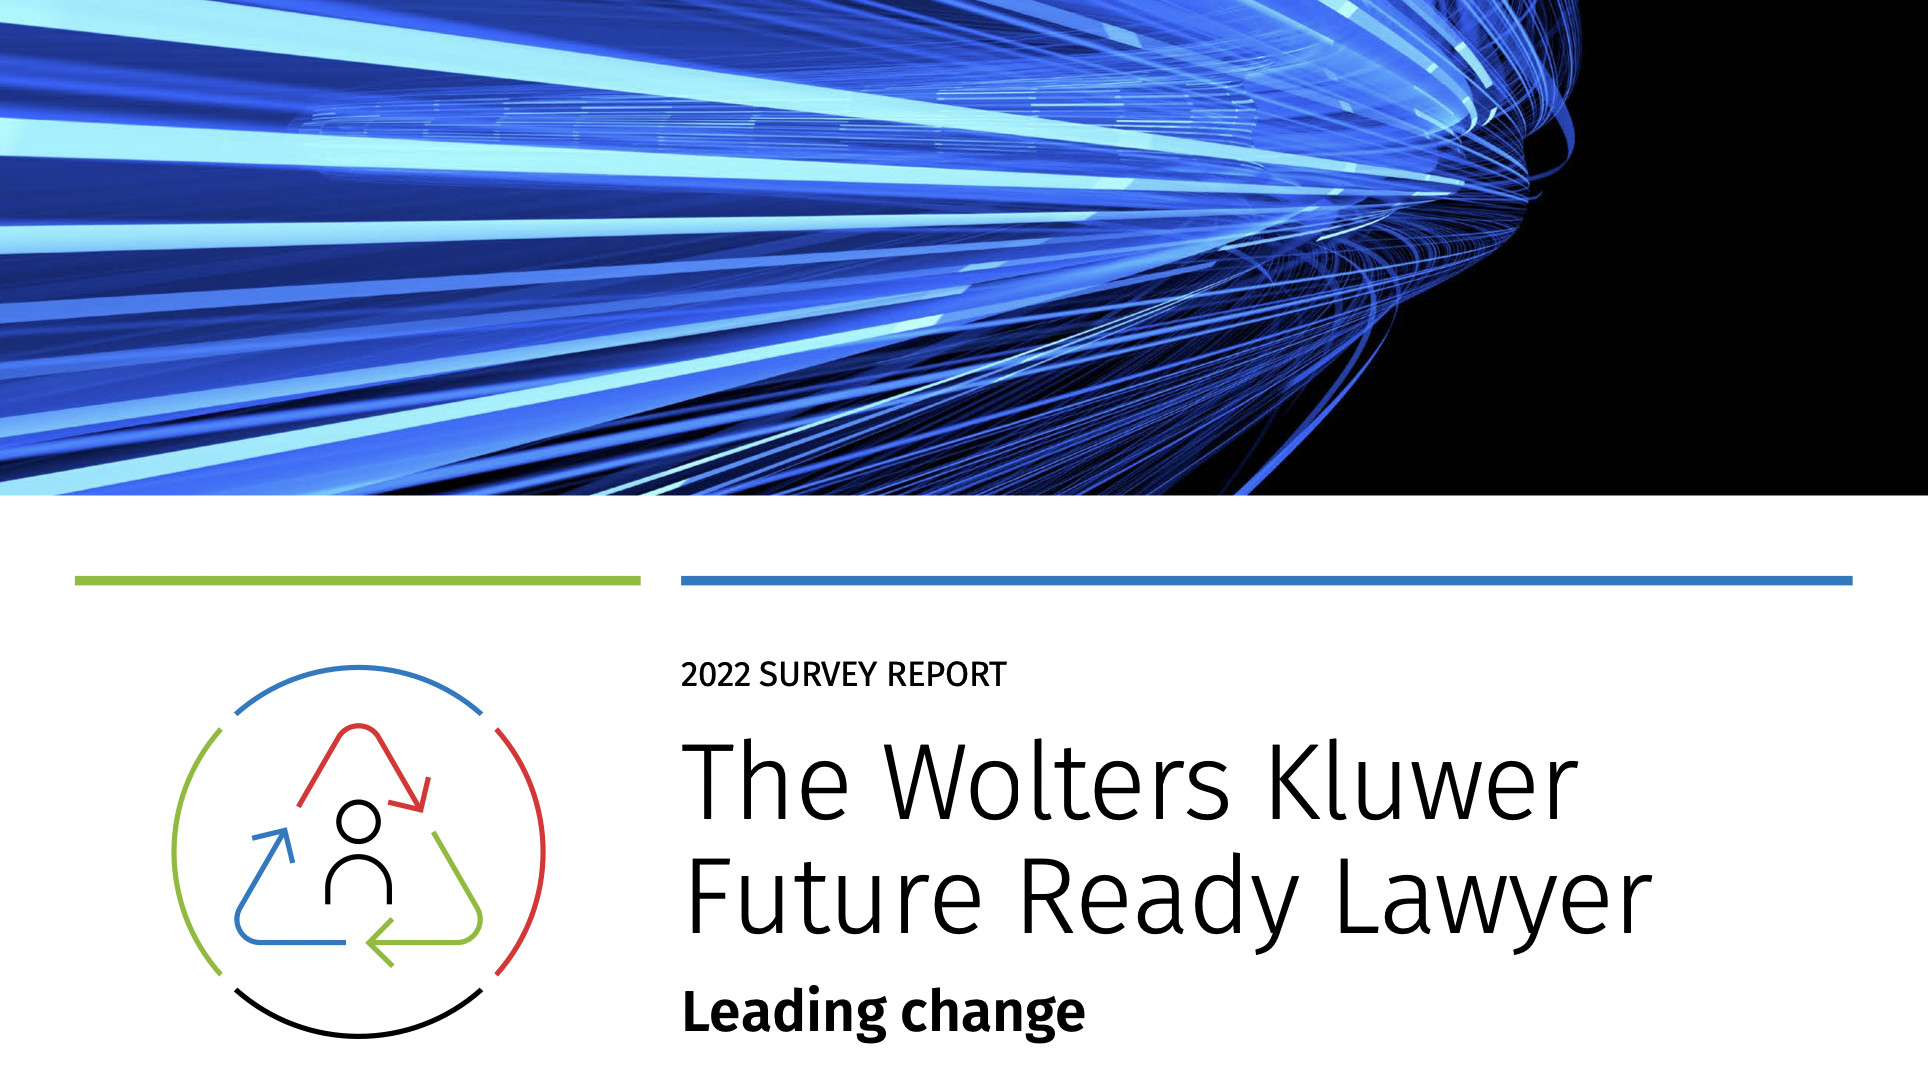 New Future Ready Lawyer Survey Finds Increasing Pressures on Legal Professionals as Pace of Change, Compliance Complexity and Talent Challenges Climb